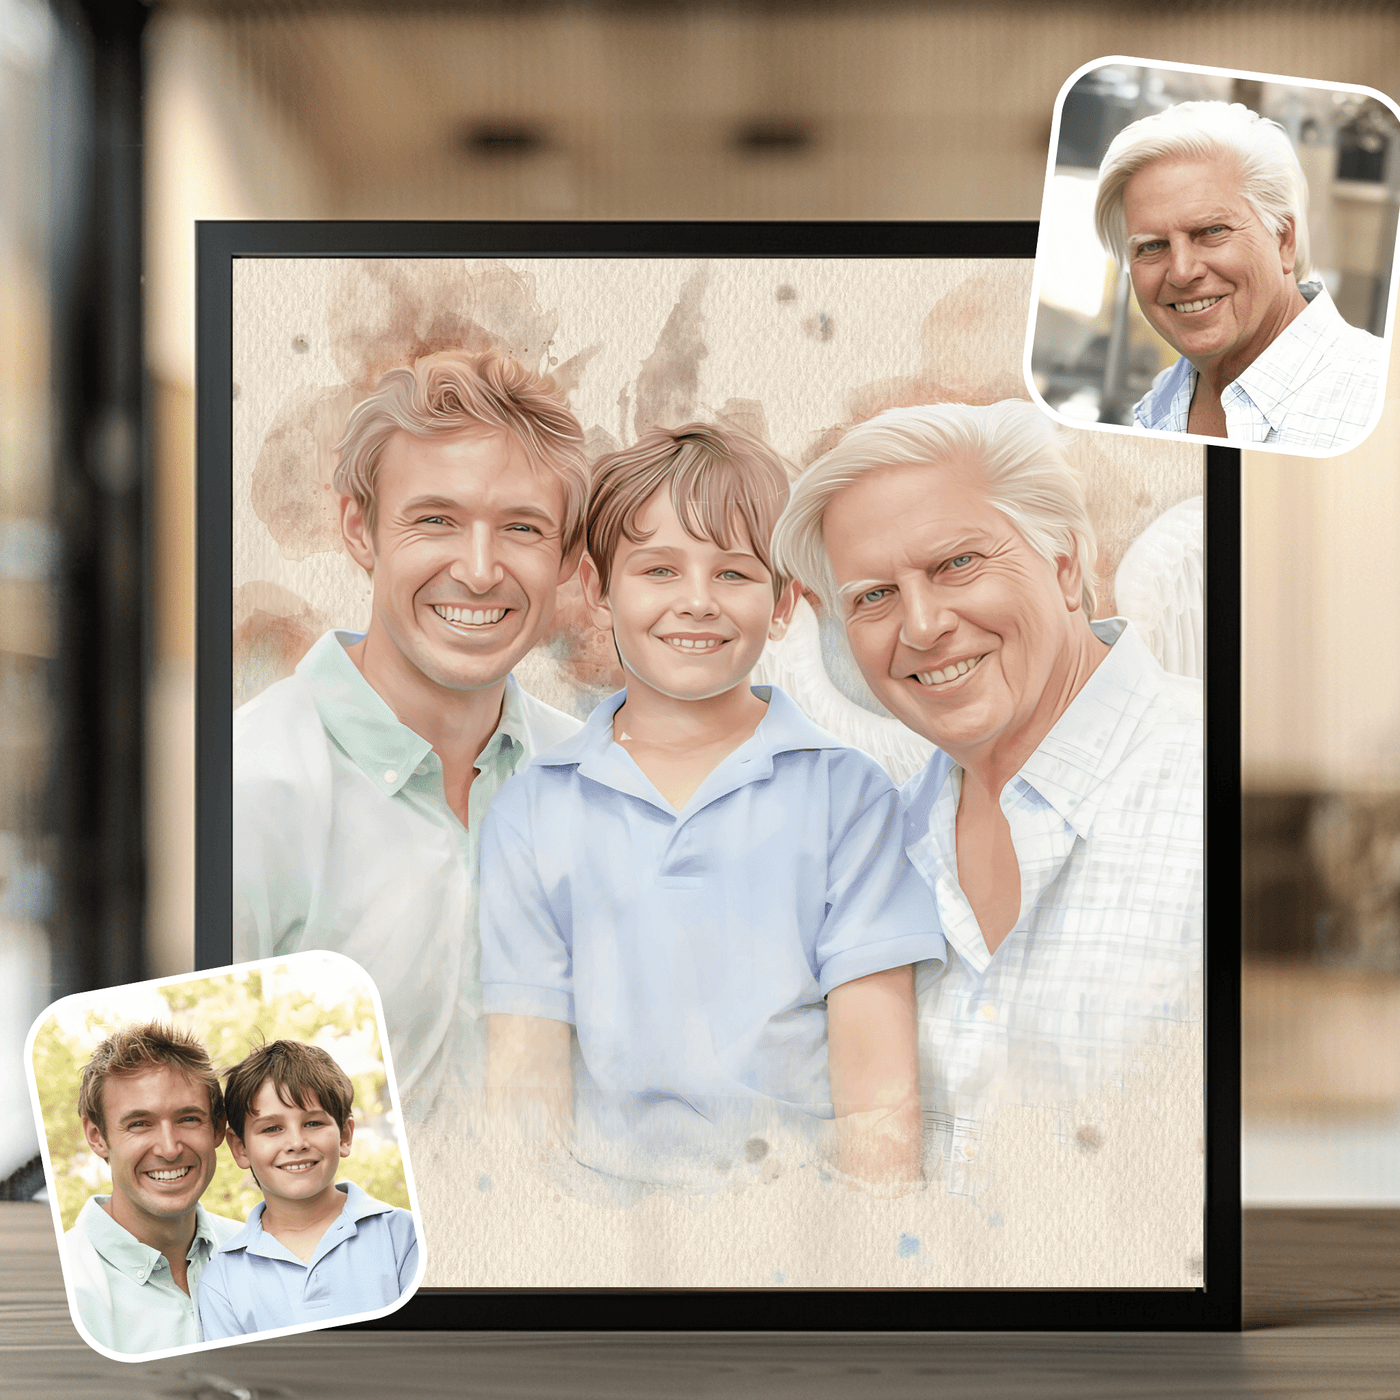 add deceased loved one to photo of a father and son photo with their deceased love one